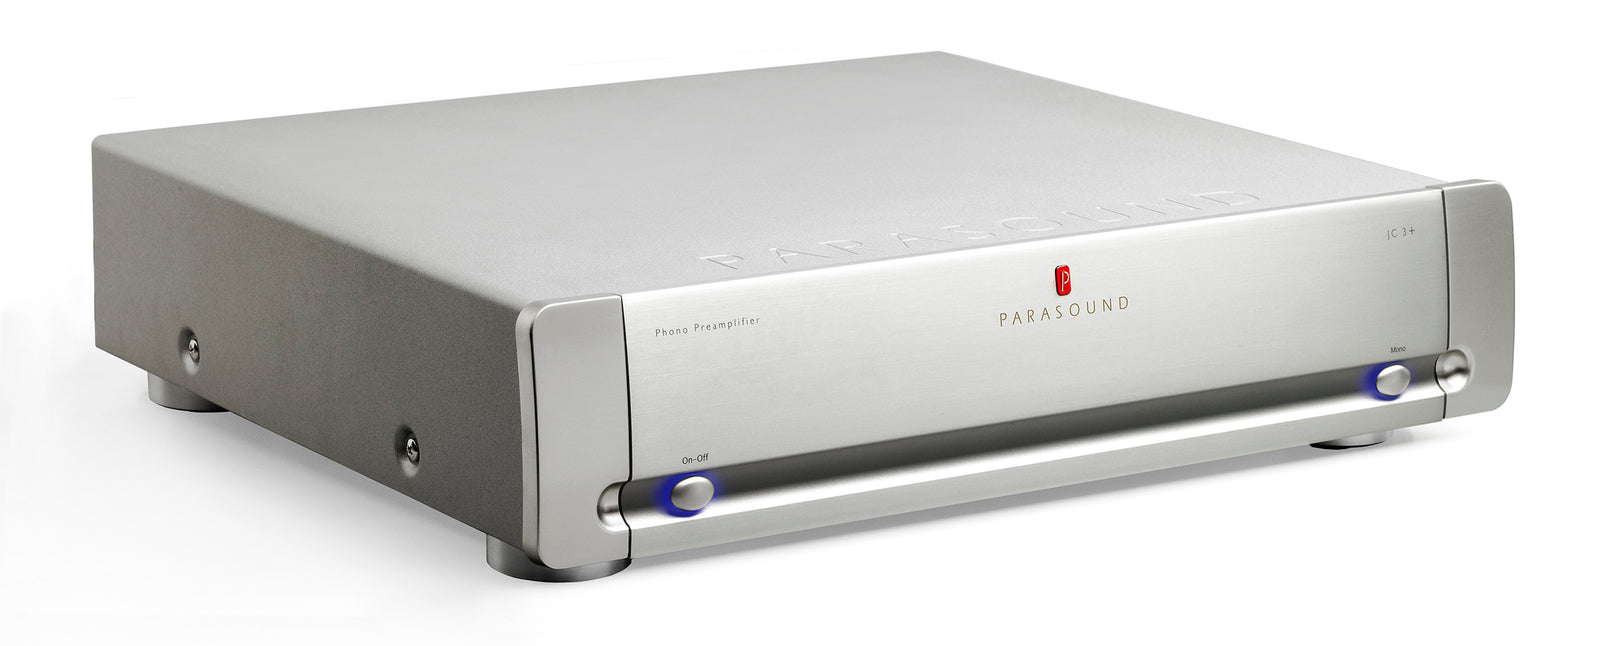 PARASOUND HALO JC 3+ PHONO PREAMPLIFIER - With a great sound into stunning packages, find all Parasound model Halo P 6 - Model Halo JC 5 - A51 - A52+ - JC 2 BP - Zpre3, A 21+ Stereo Power Amplifier, Amplifier, Mono Power Amplifier, Phono Preamplifier, Integrated Amplifier & DAC, Speaker Amplifier and more available at Vinyl Sound. We have mastered the art of assembling audio systems capable of reproducing music so perfectly, providing you with emotional experiences and satisfaction for many years to come...